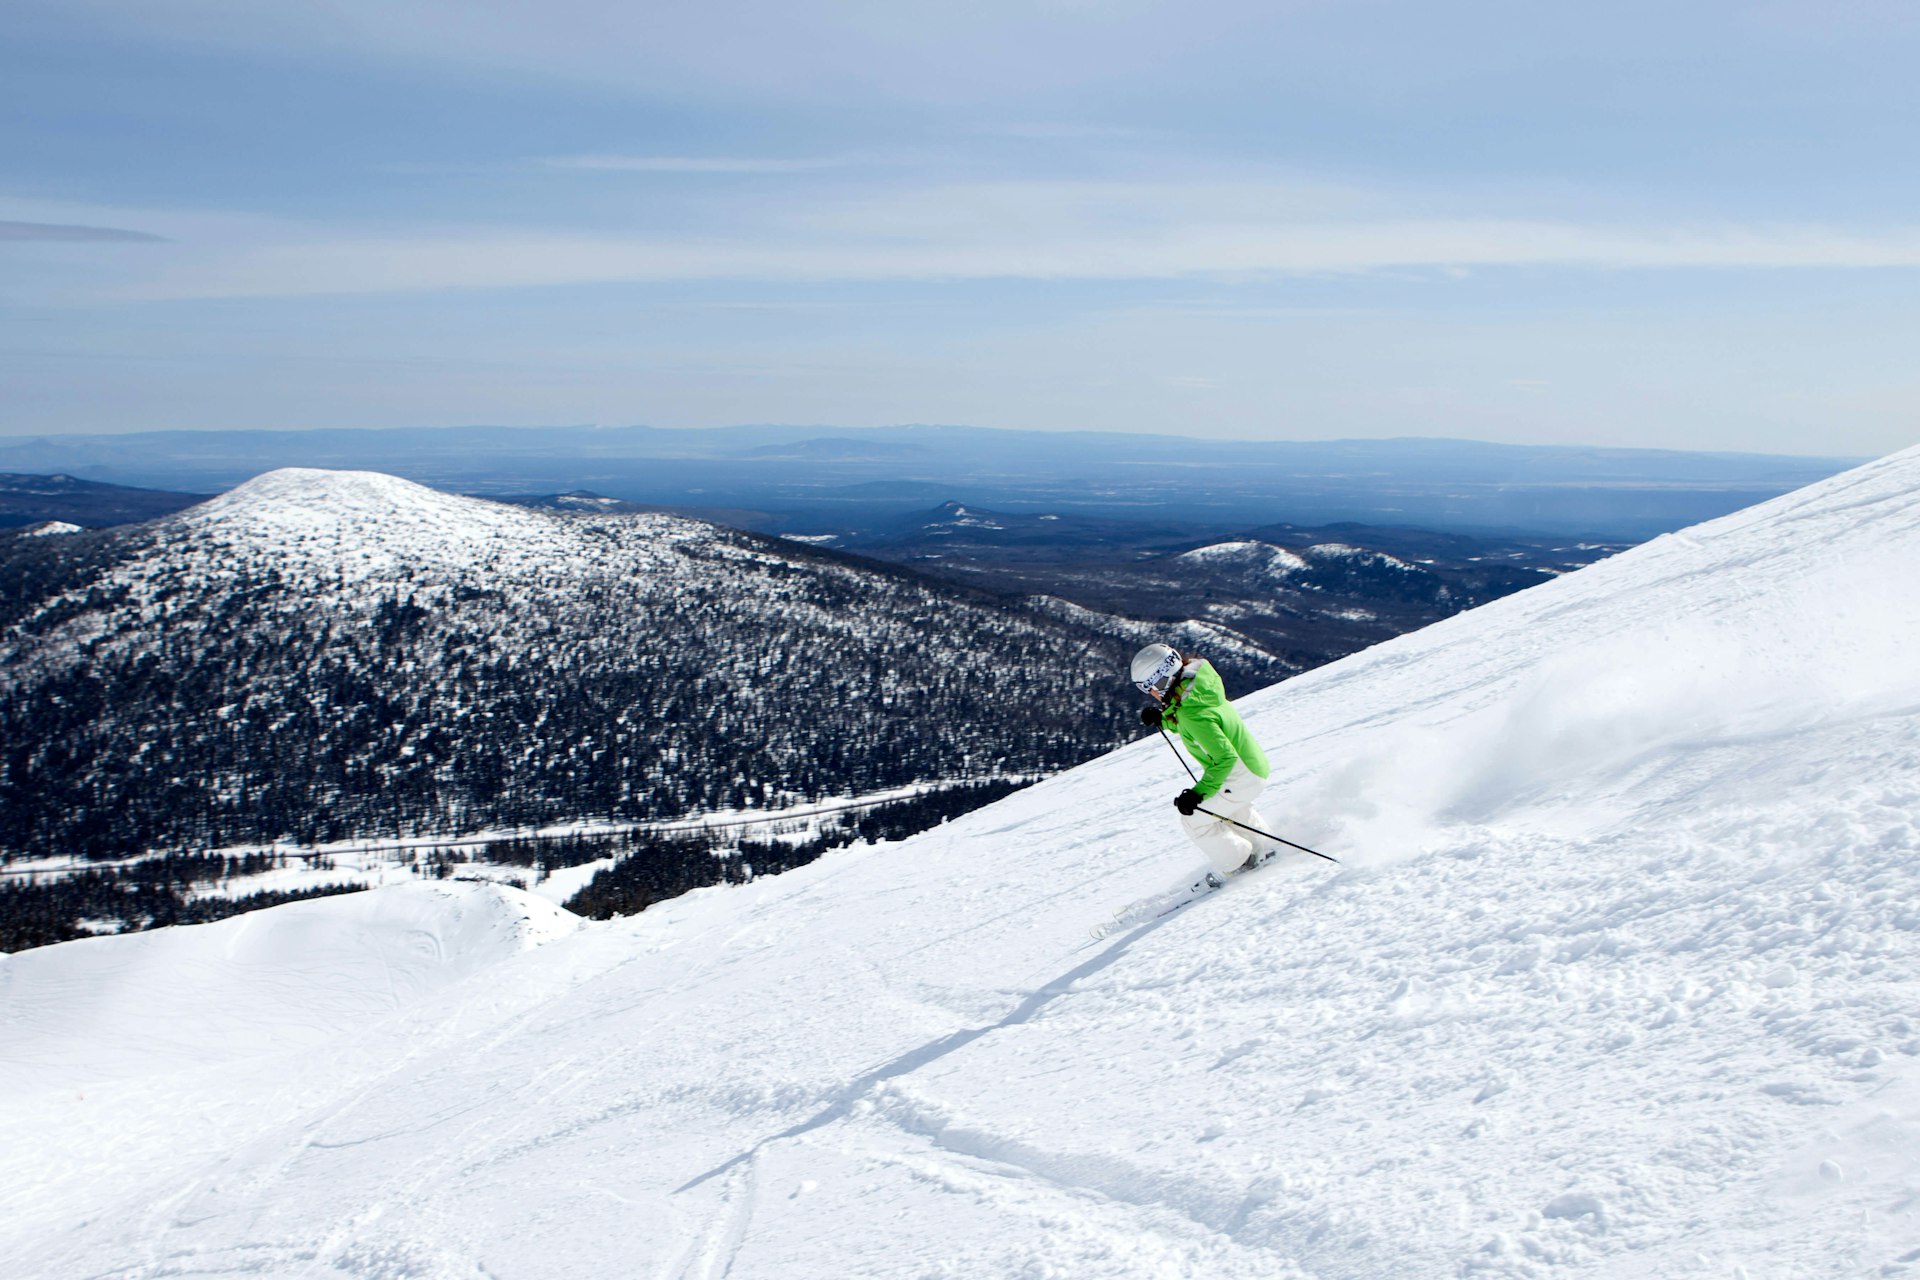 A woman skiing at Mt. Bachelor resort in Bend Oregon